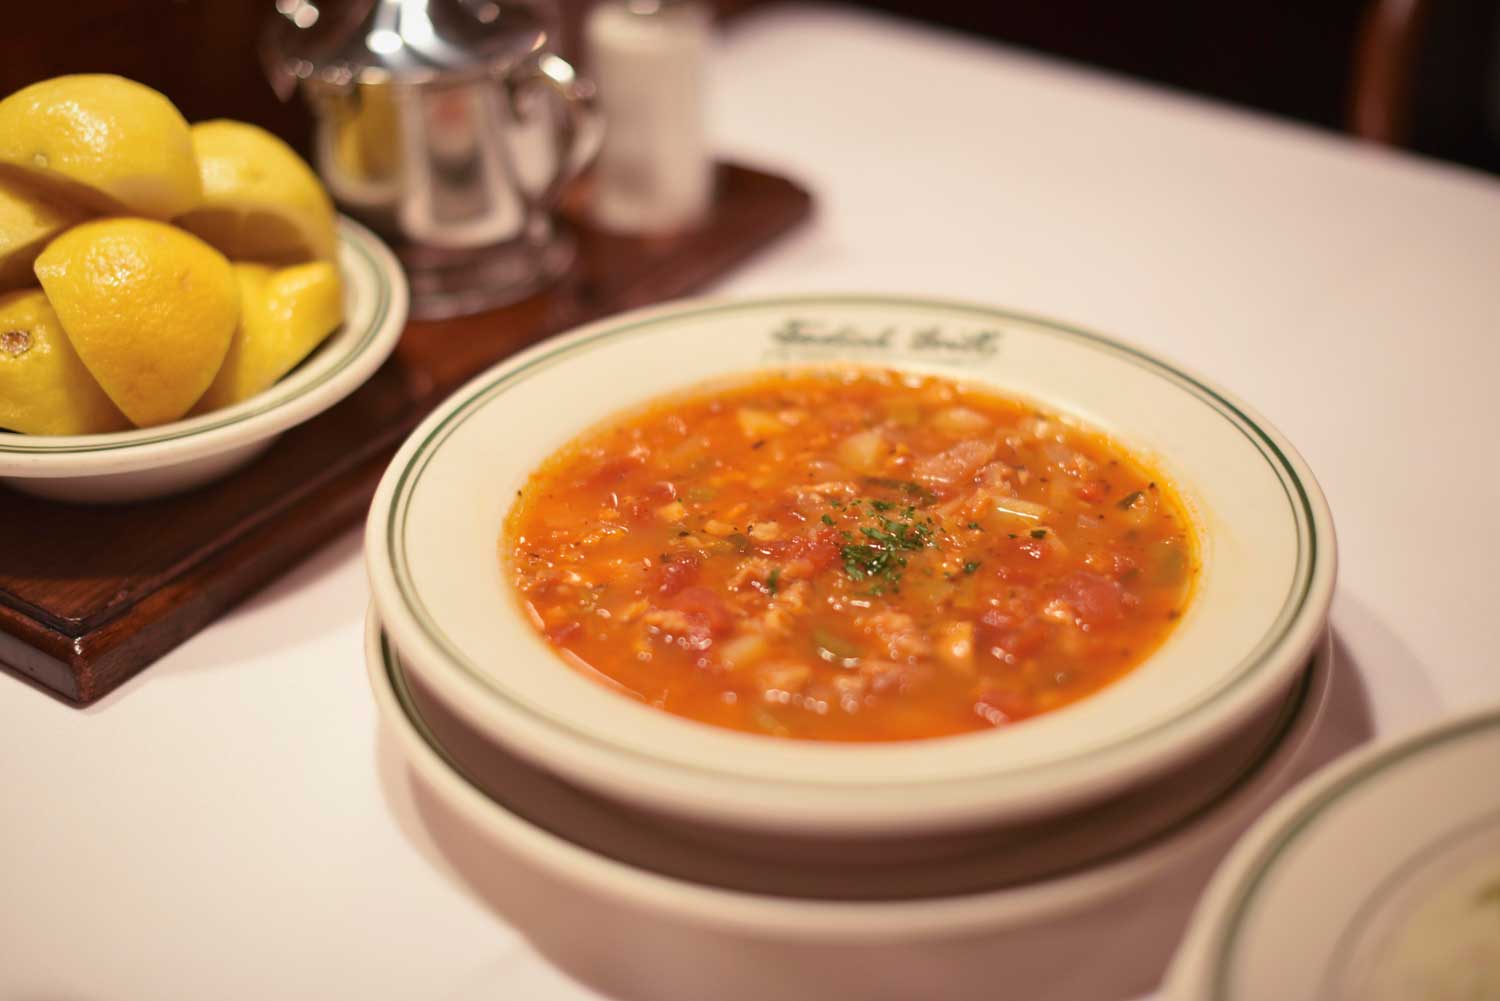 The red New England style clam chowder is a popular staple on the menu.